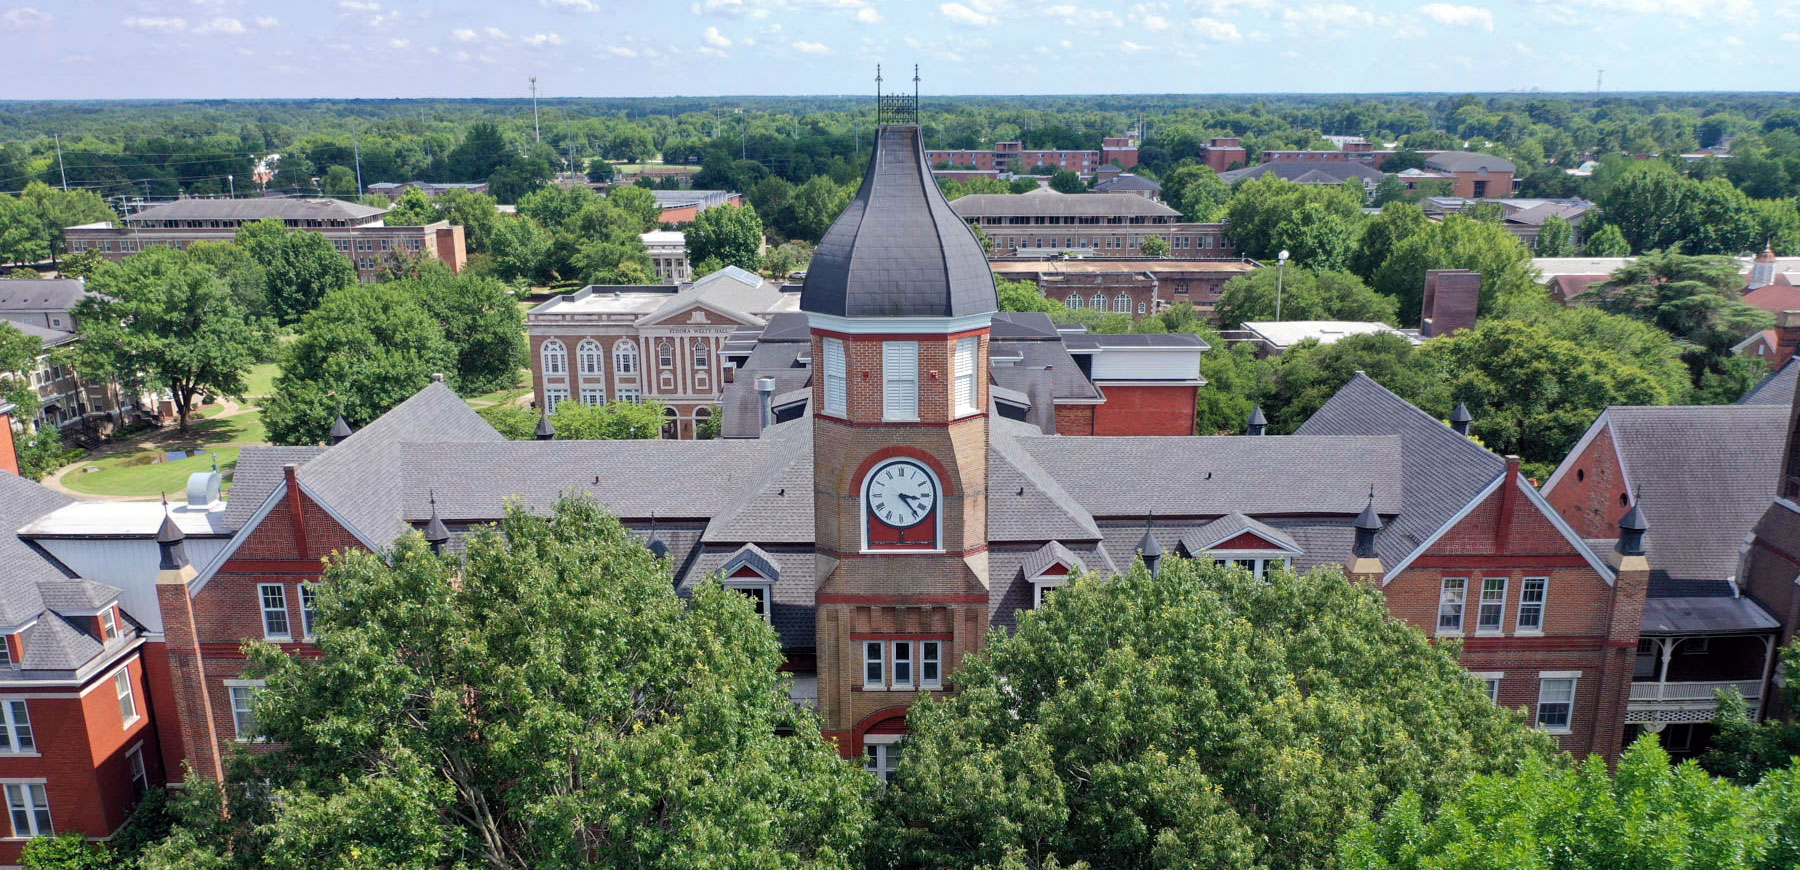 An aerial view of campus with the clocktower in the middle.